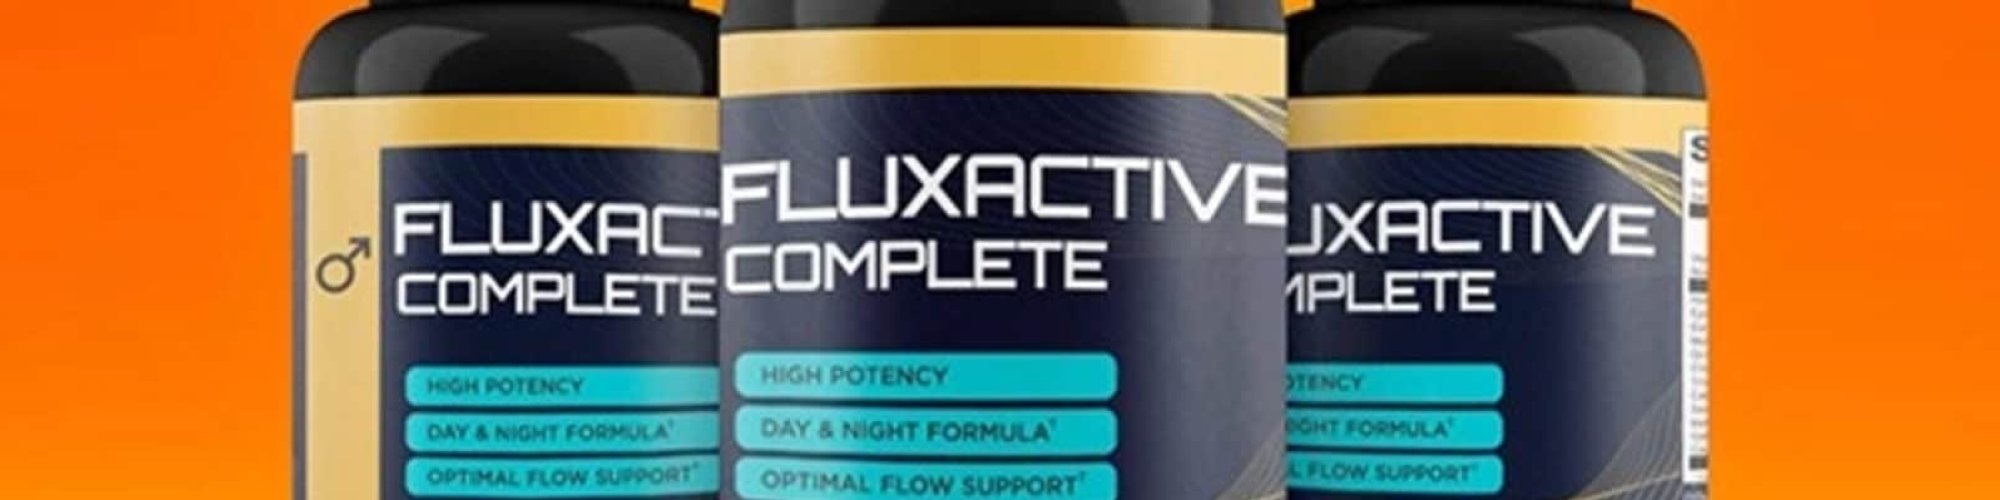 Fluxactive Complete Reviews - How Does It Work?